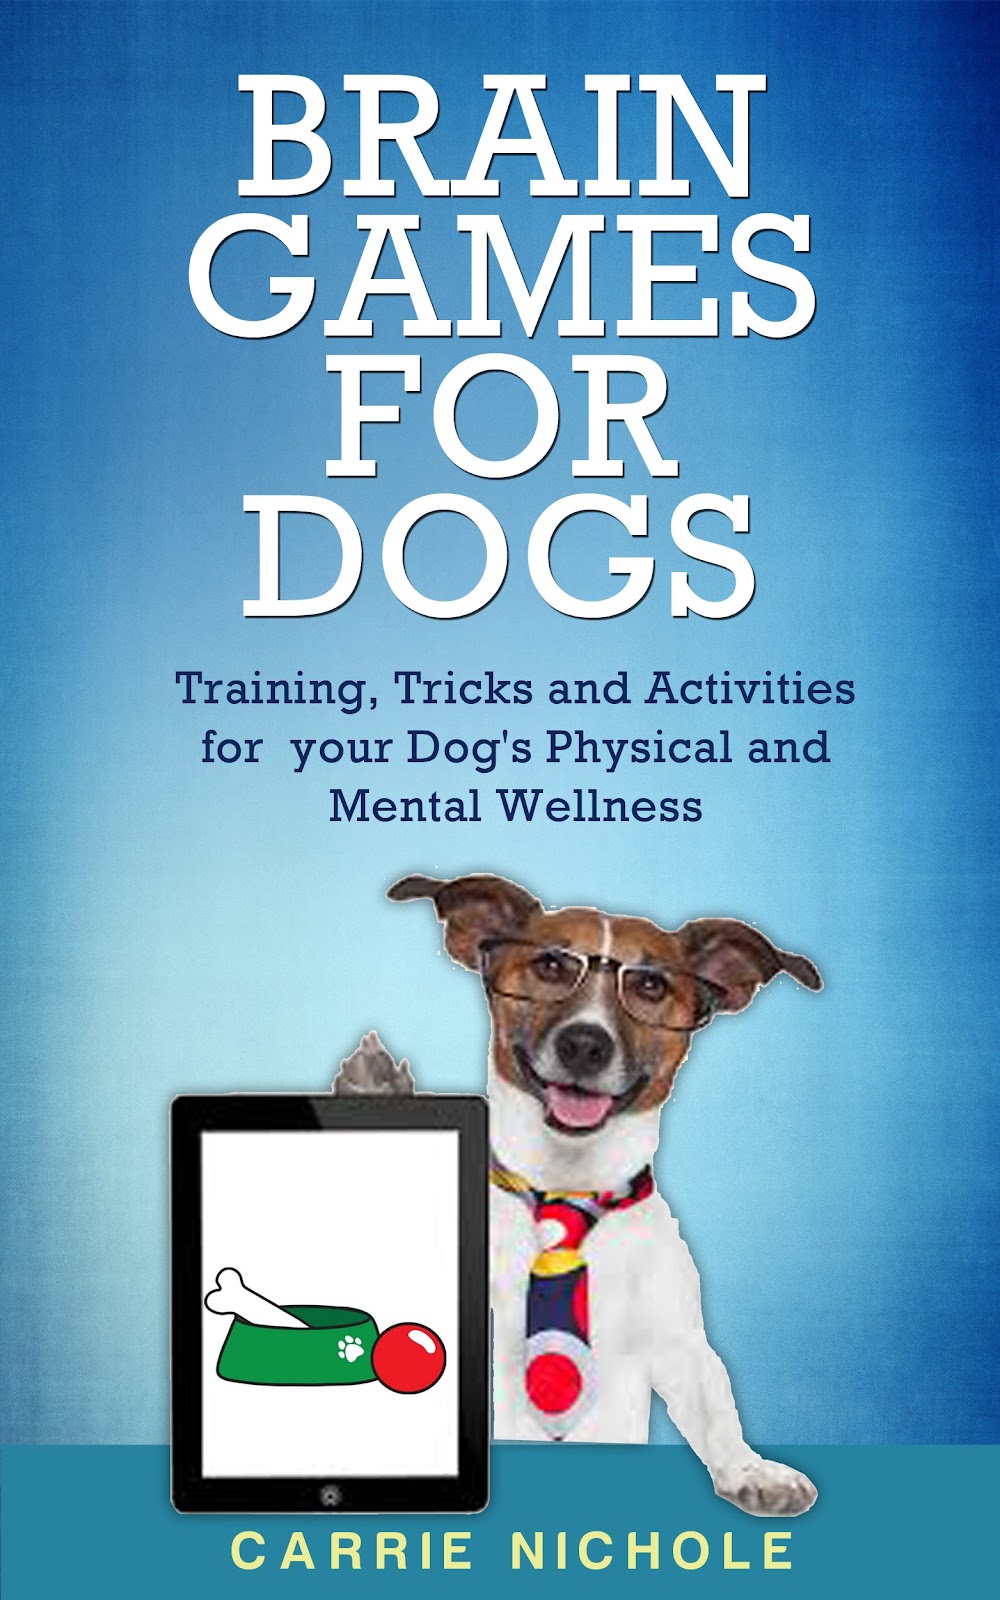 Free Download Books - Brain Games for Dogs: Training, Tricks and Activities for your Dog’s Physical and Mental wellness( Dog training, Puppy training,Pet training books, Puppy ... games for dogs, How to train a dog Book 1)